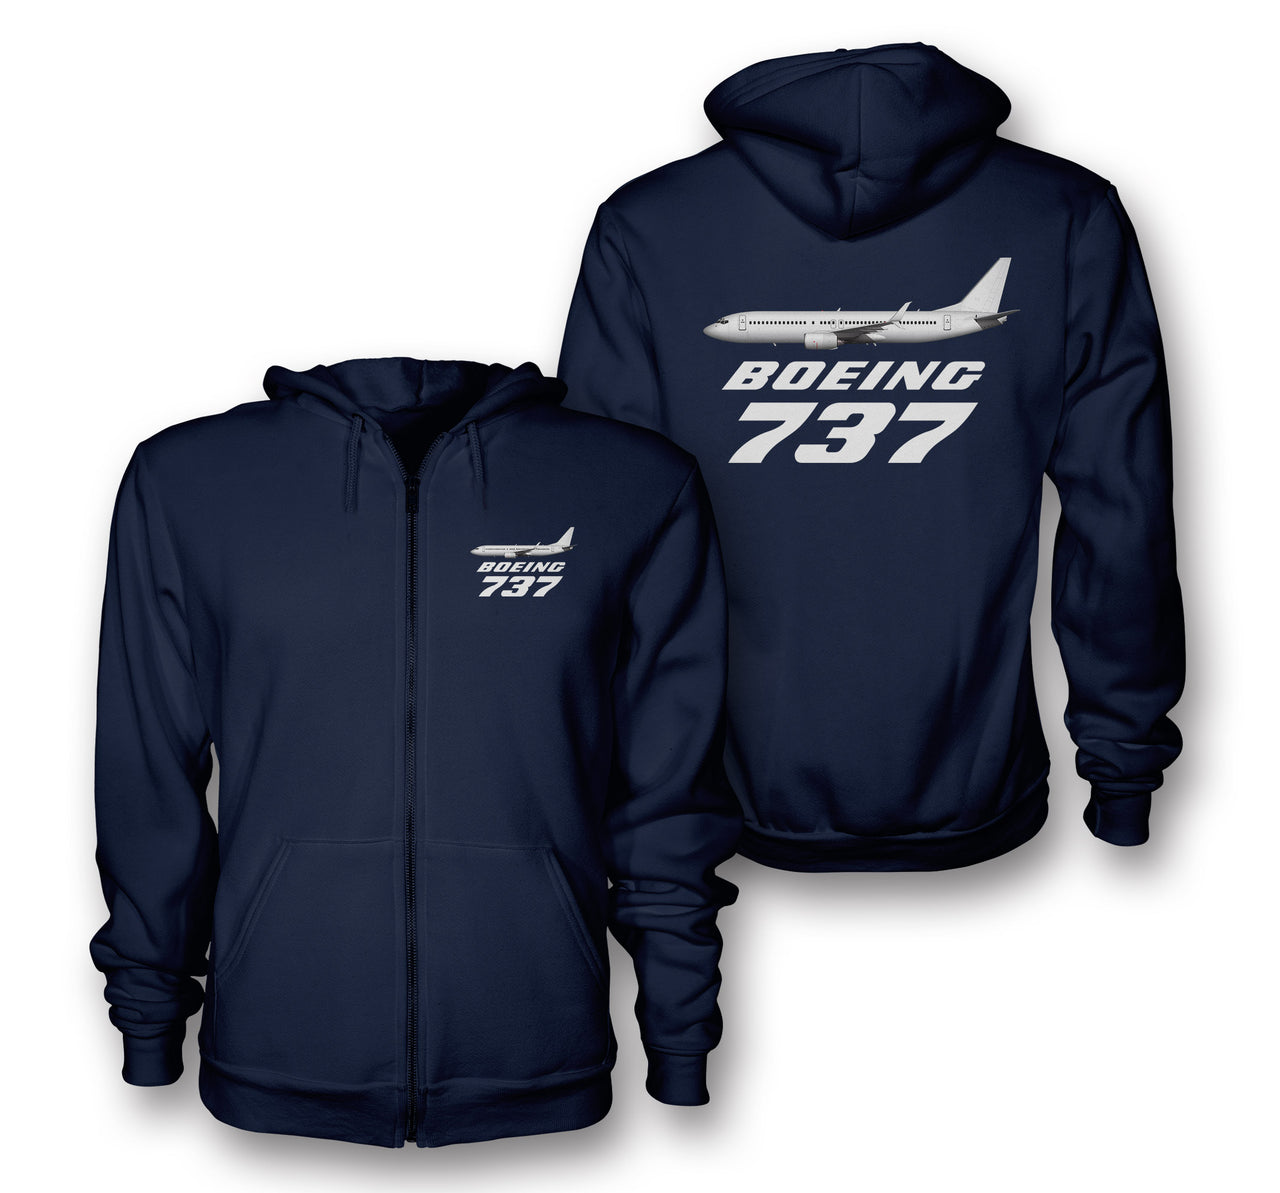 The Boeing 737 Designed Zipped Hoodies